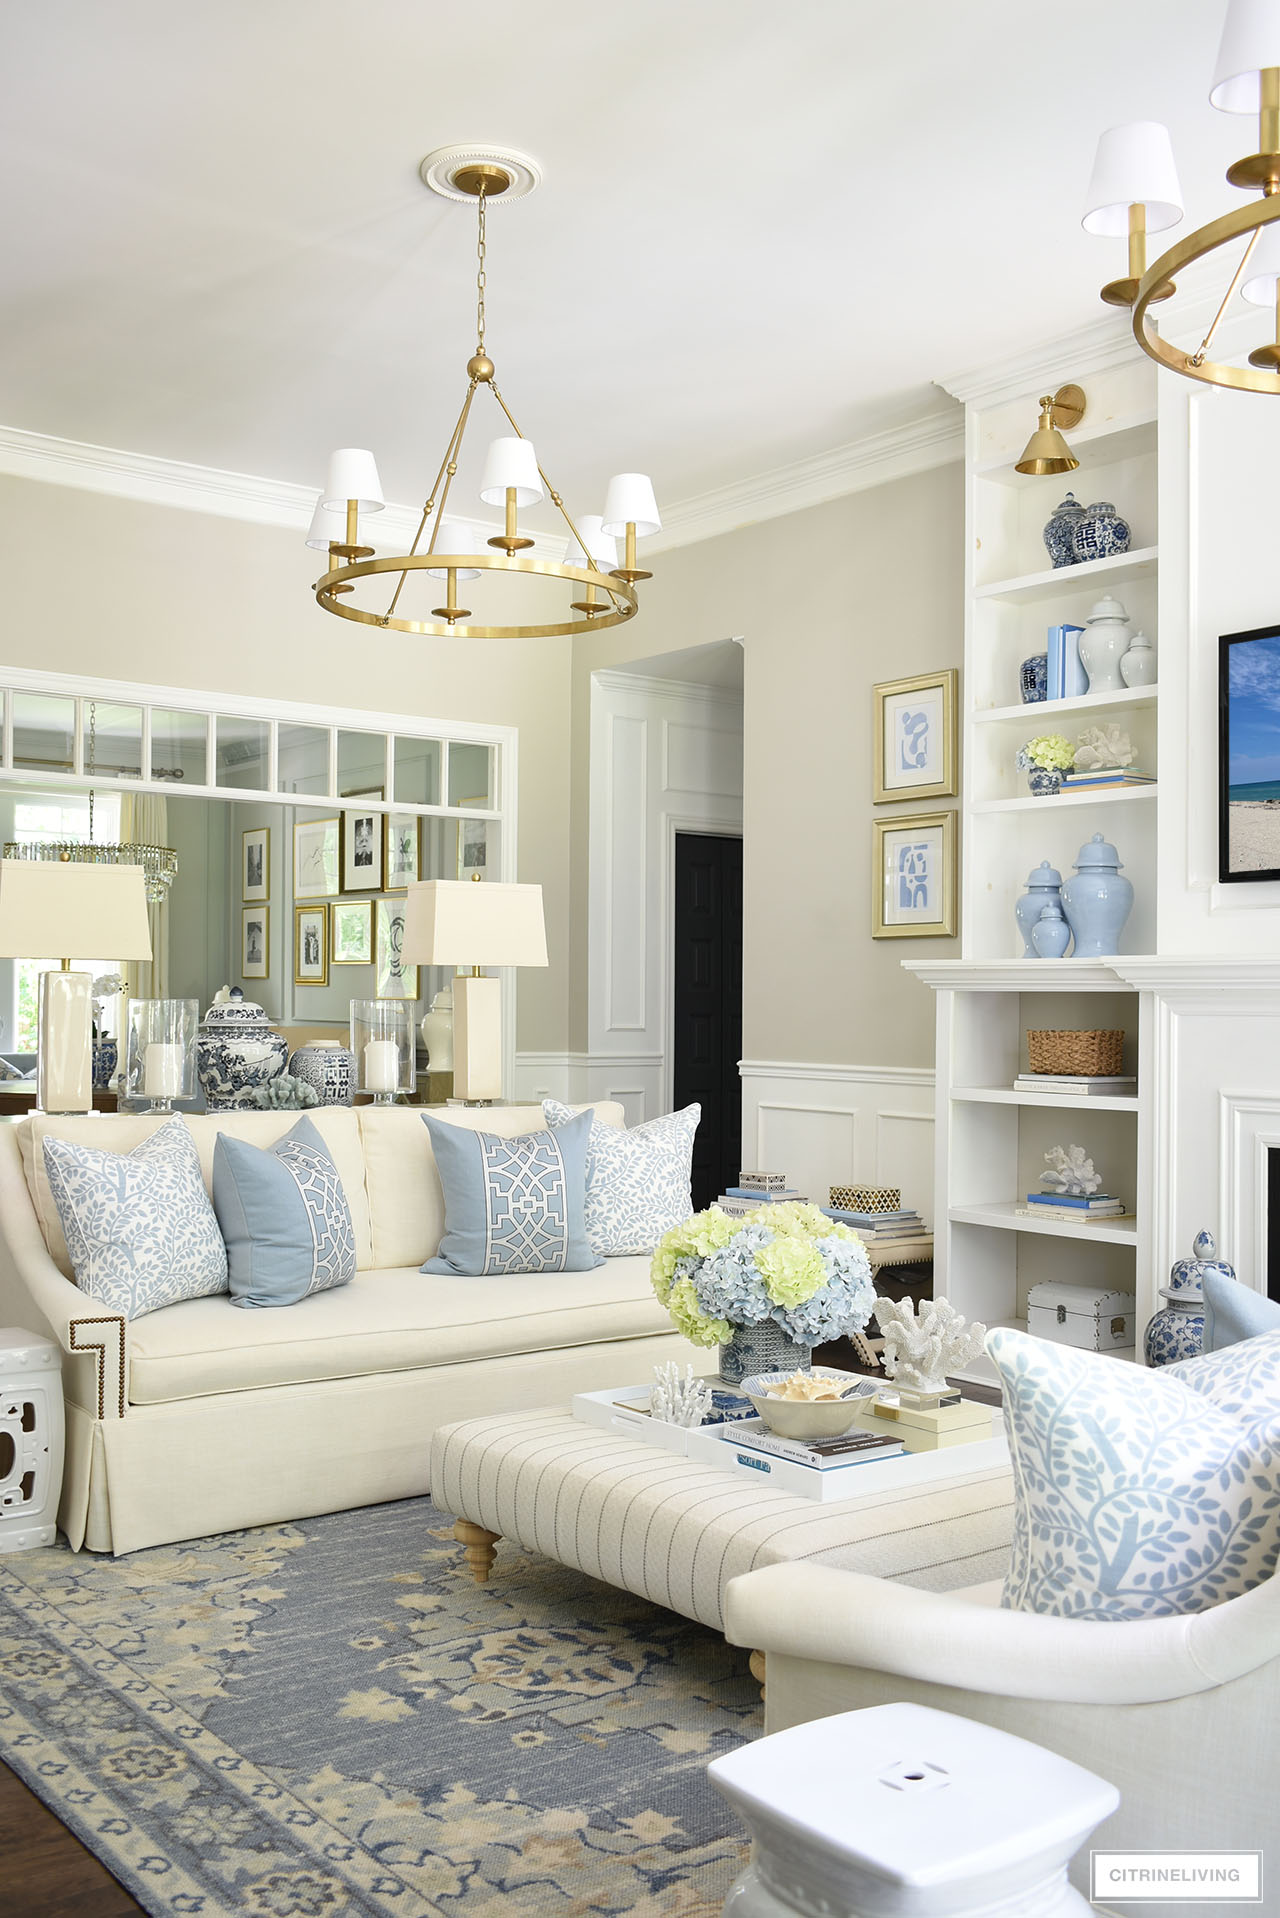 Beautiful, traditional living room decorated for summer in soft blues and white, with light blue and light green hydrangeas, coastal accents and ginger jars.